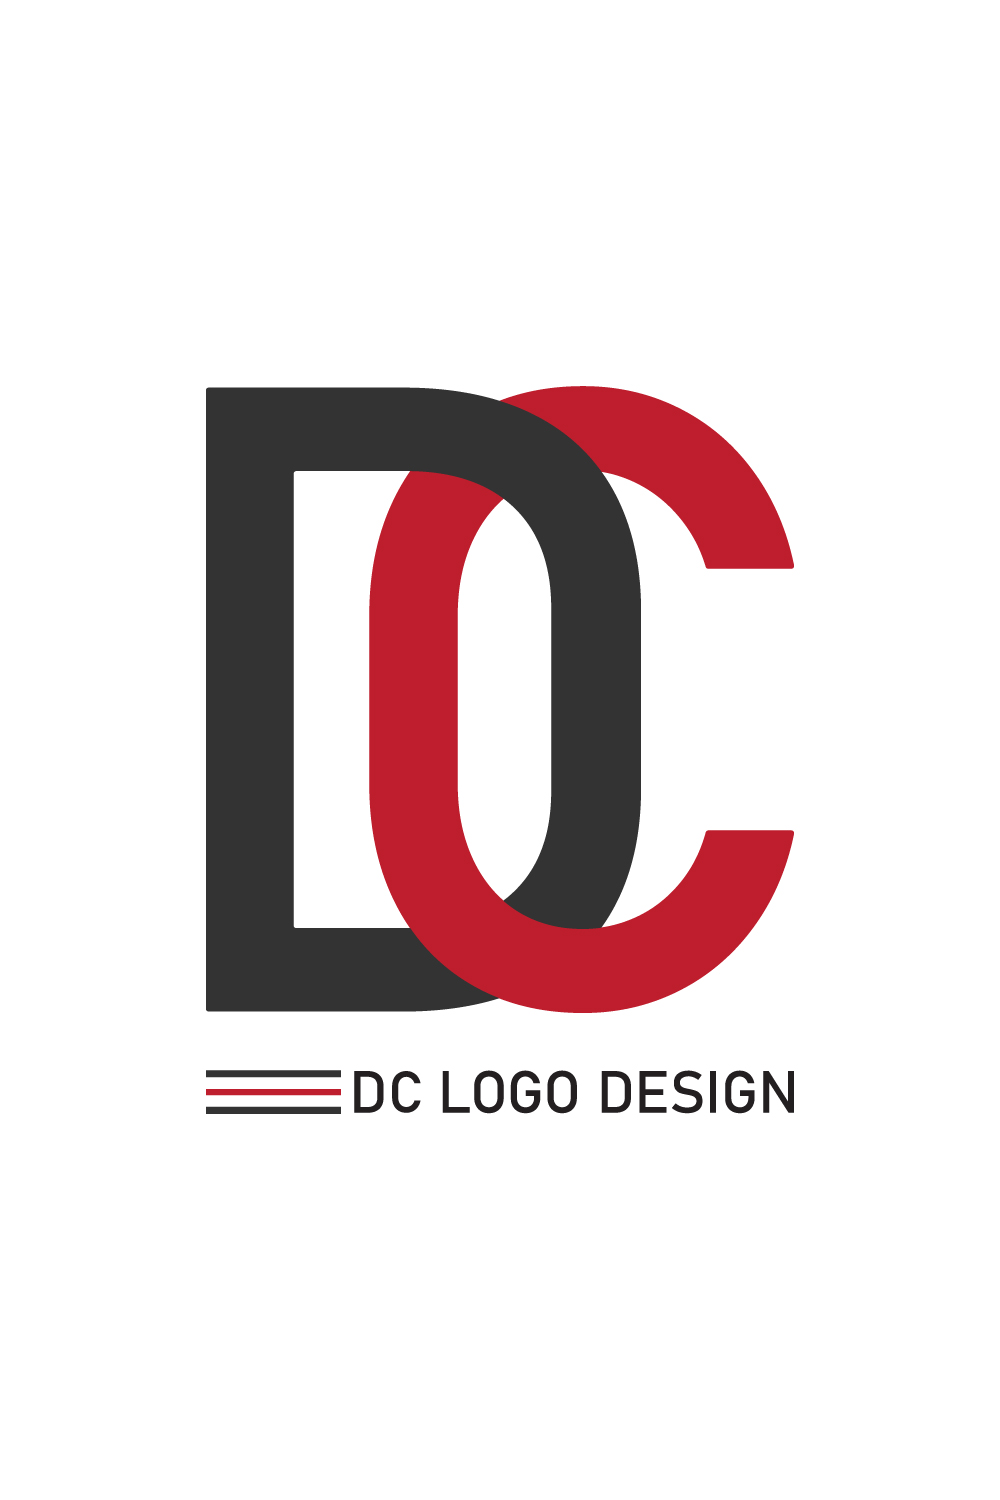 Initials DC letters logo design template arts DC logo design black and red color best icon CD logo vector images CD logo design monogram best company identity pinterest preview image.